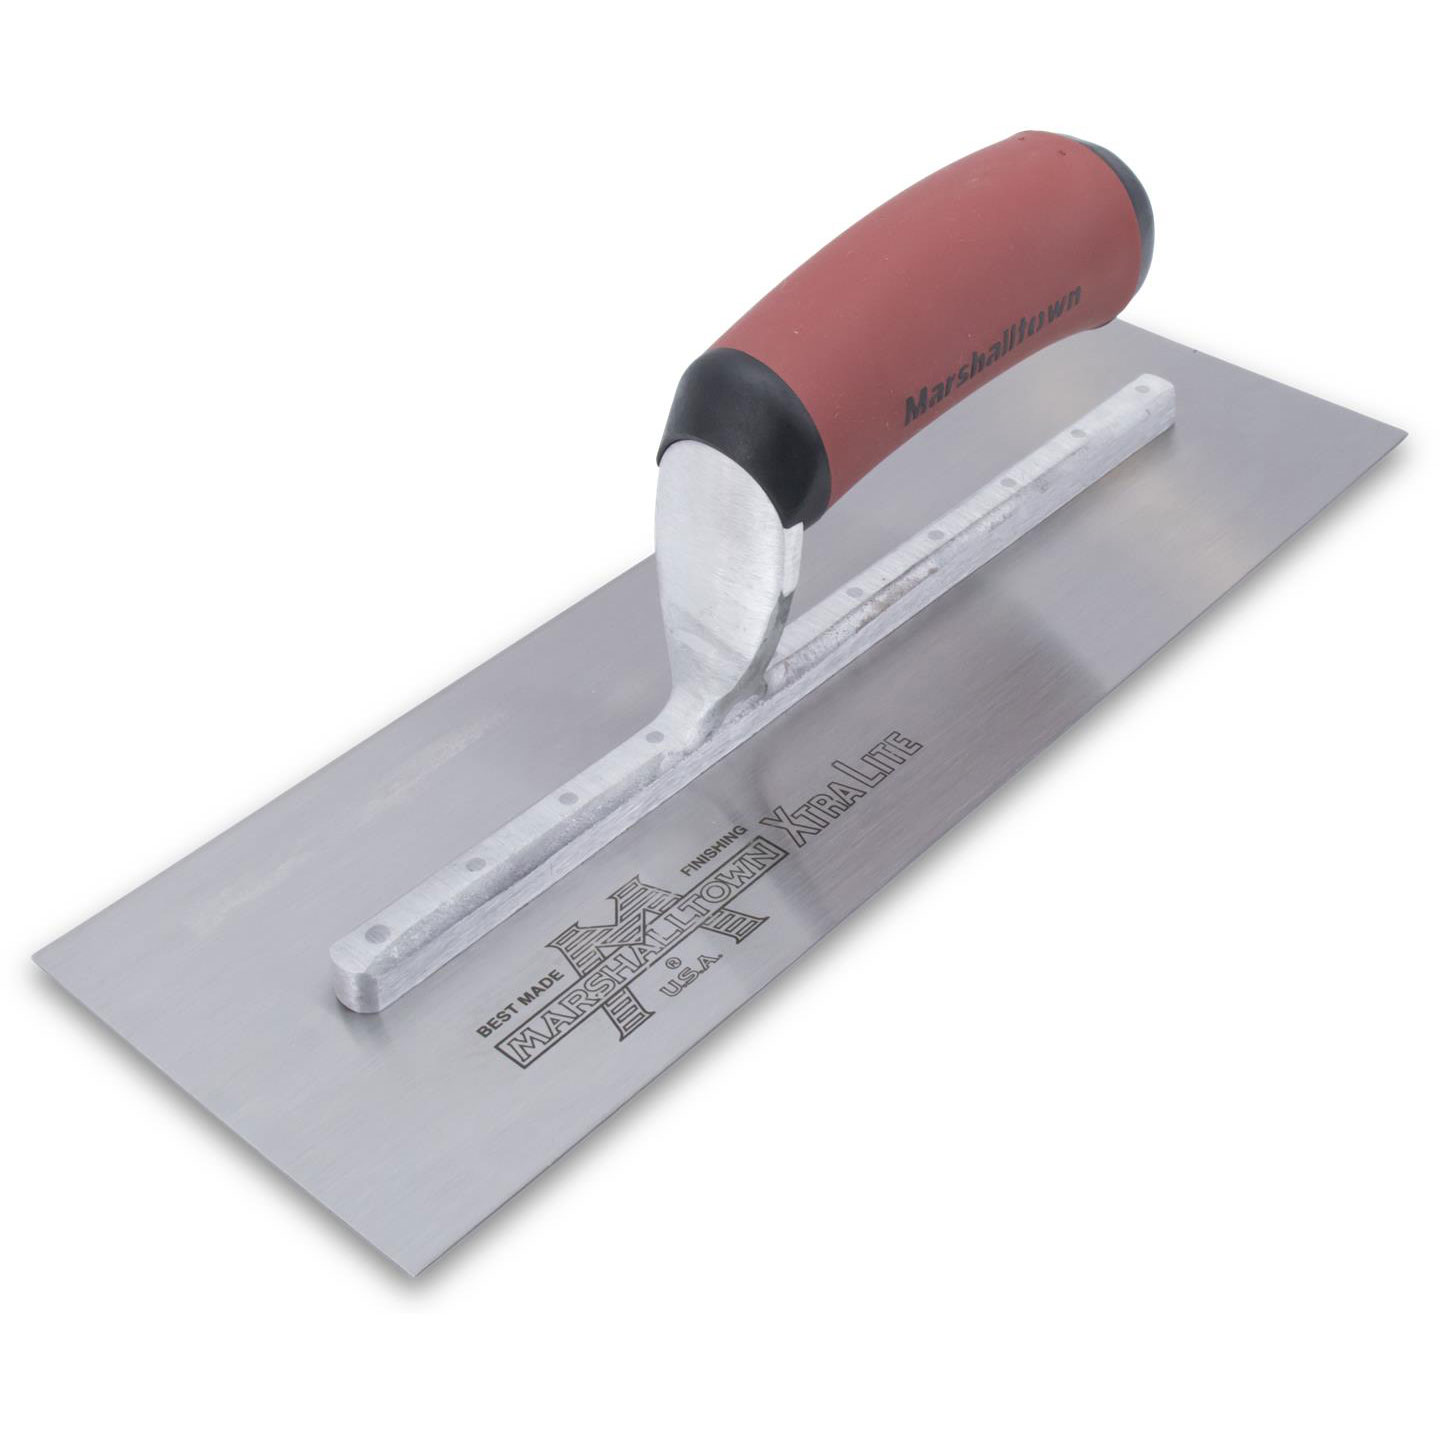 Marshalltown MXS76D 18in x 3-1/2in Finishing Trowel with Curved DuraSoft Handle MXS76D